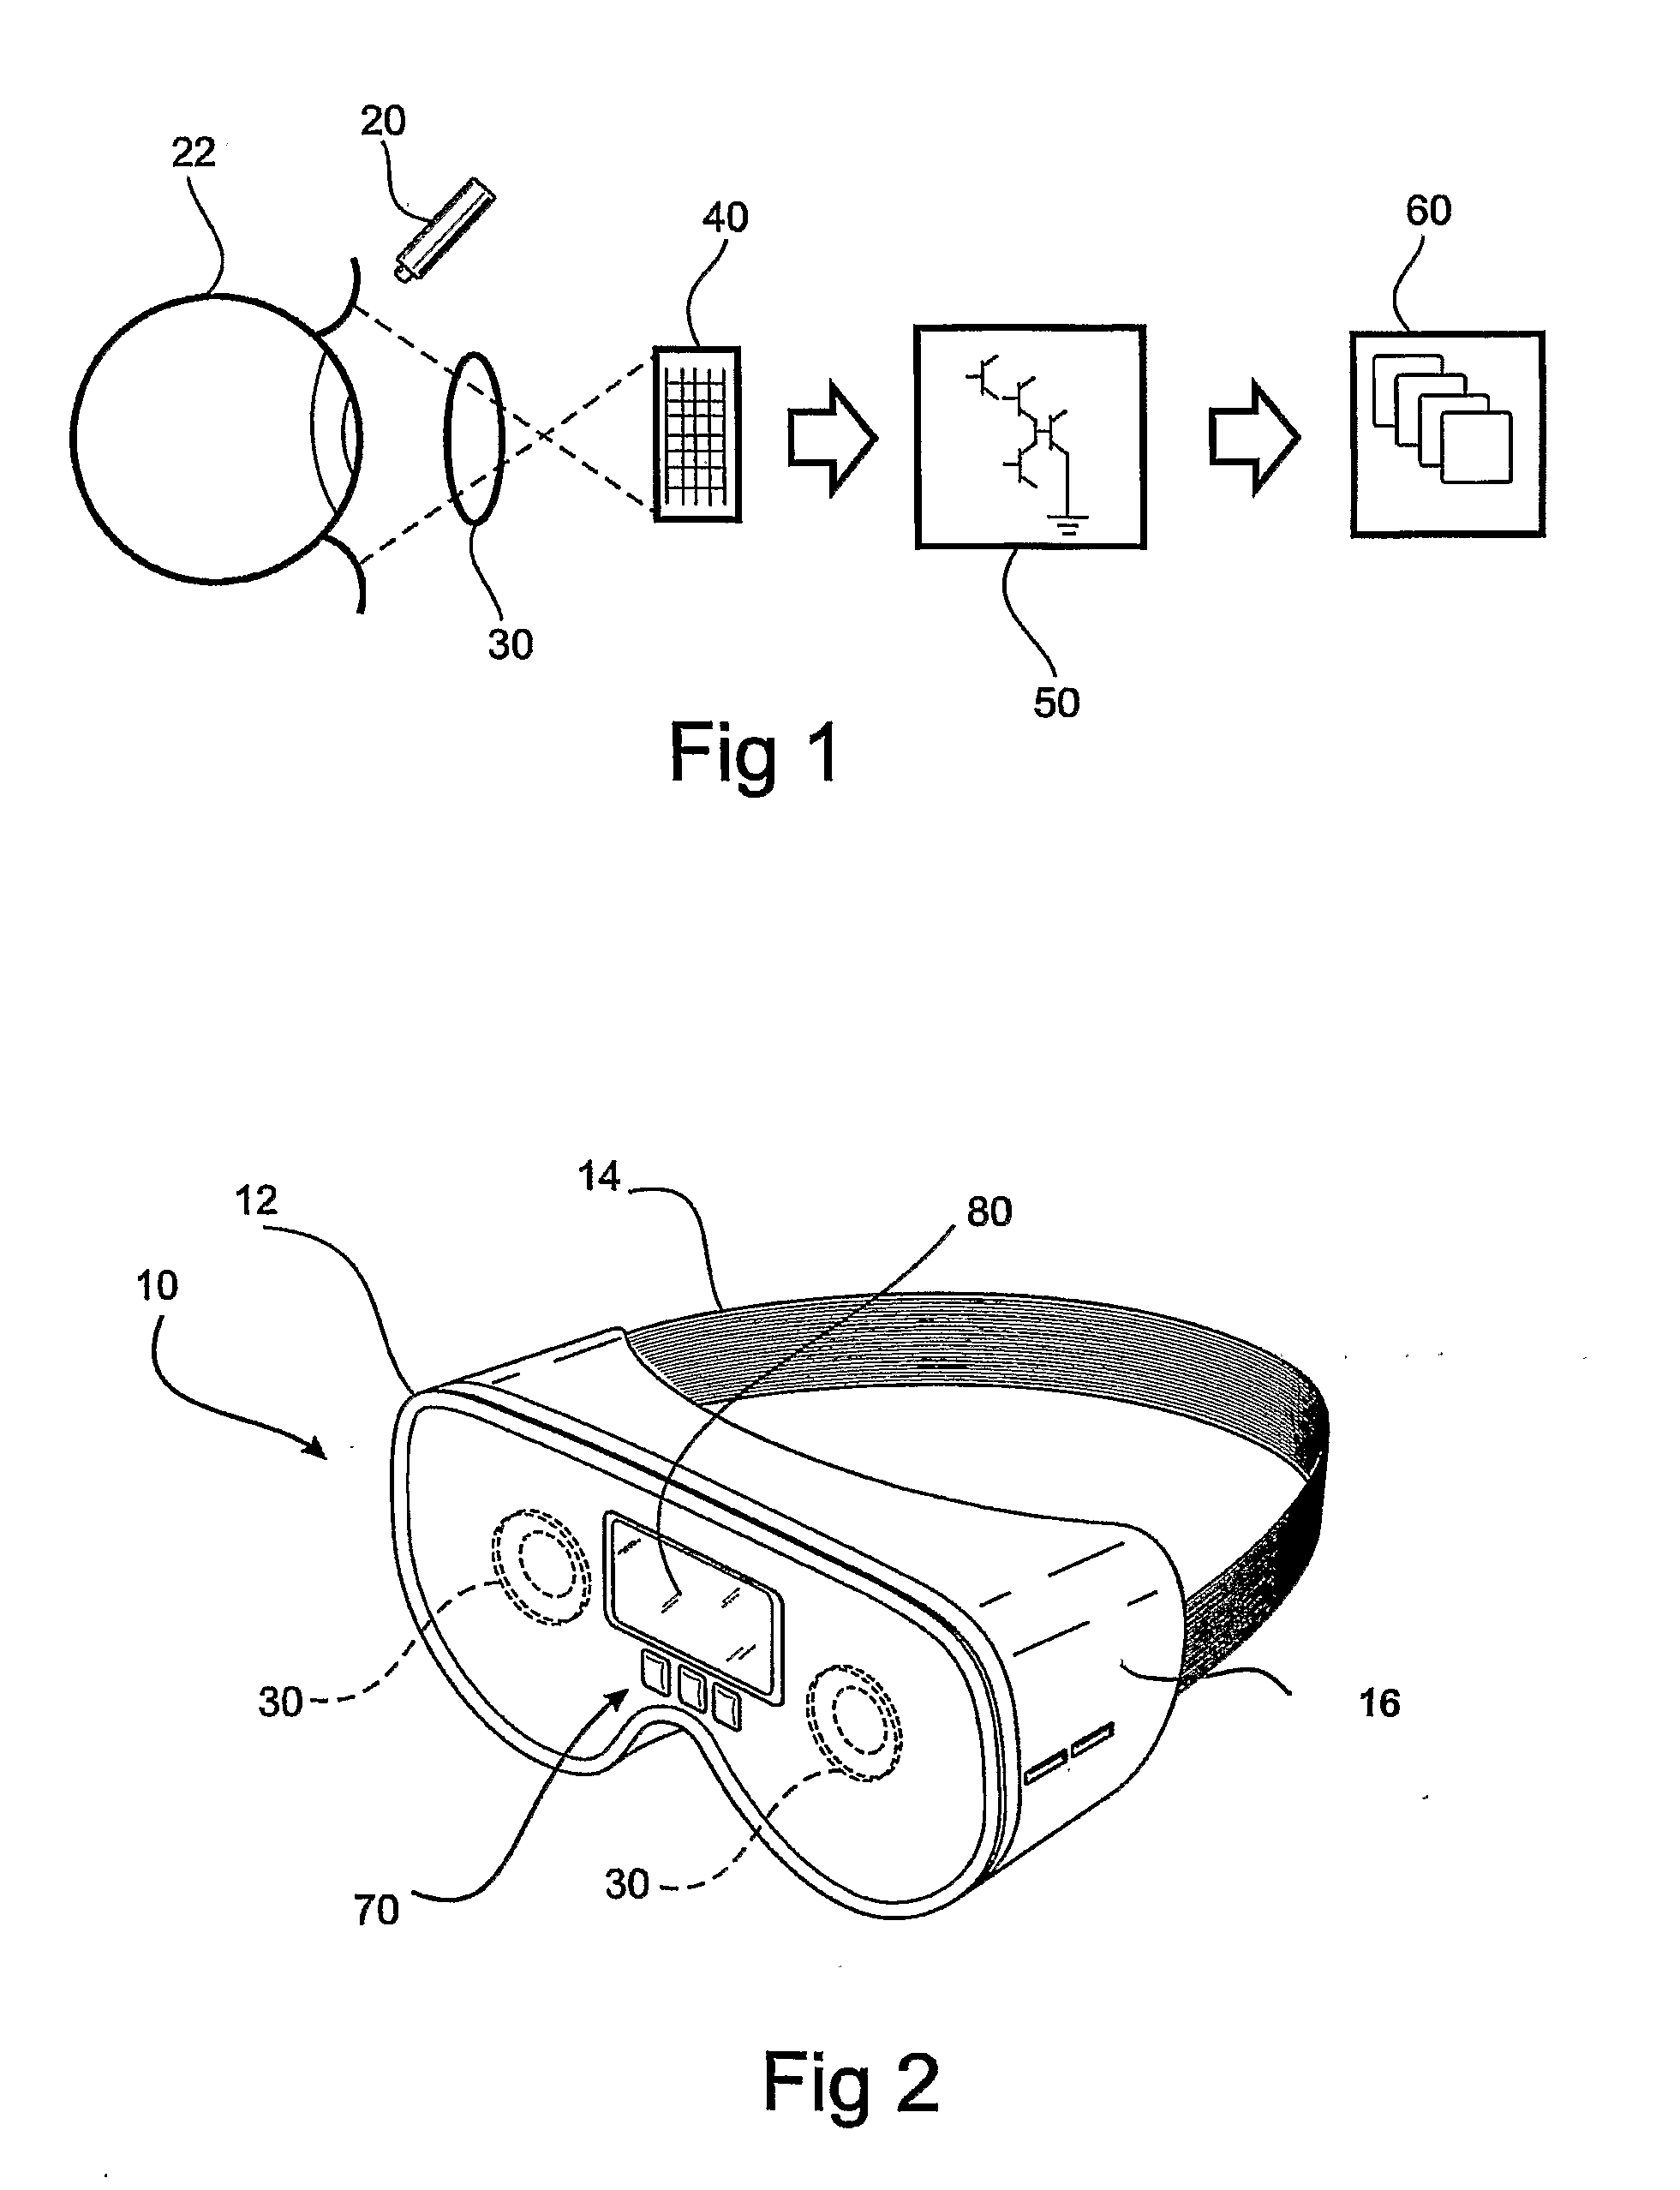 Portable eye monitoring device and methods for using the same